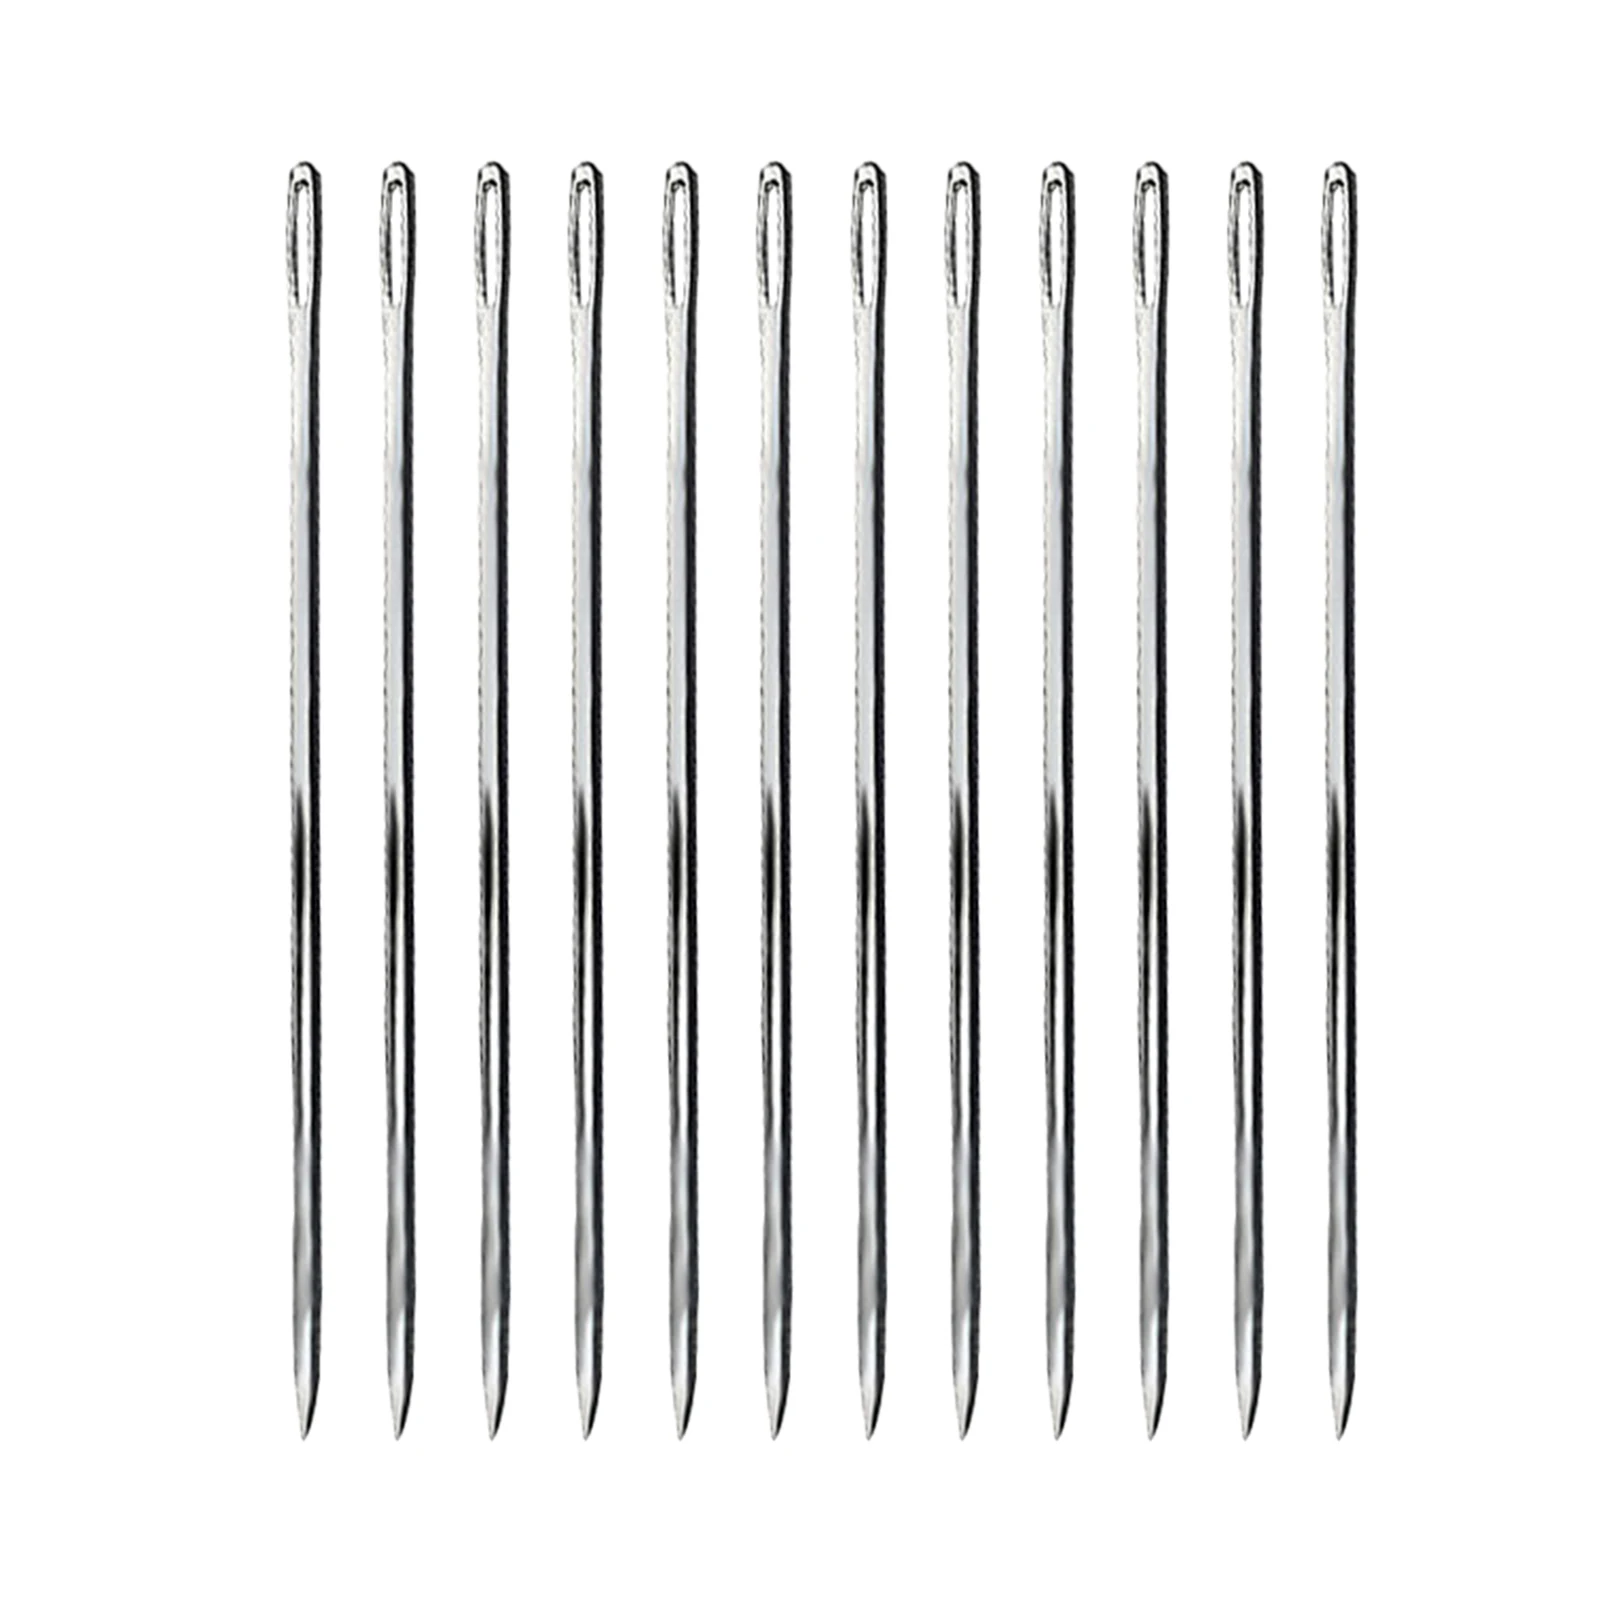 12pcs Wig Pins 6cm Straight Needles for Sewing Craft Wigs Tool Model Making